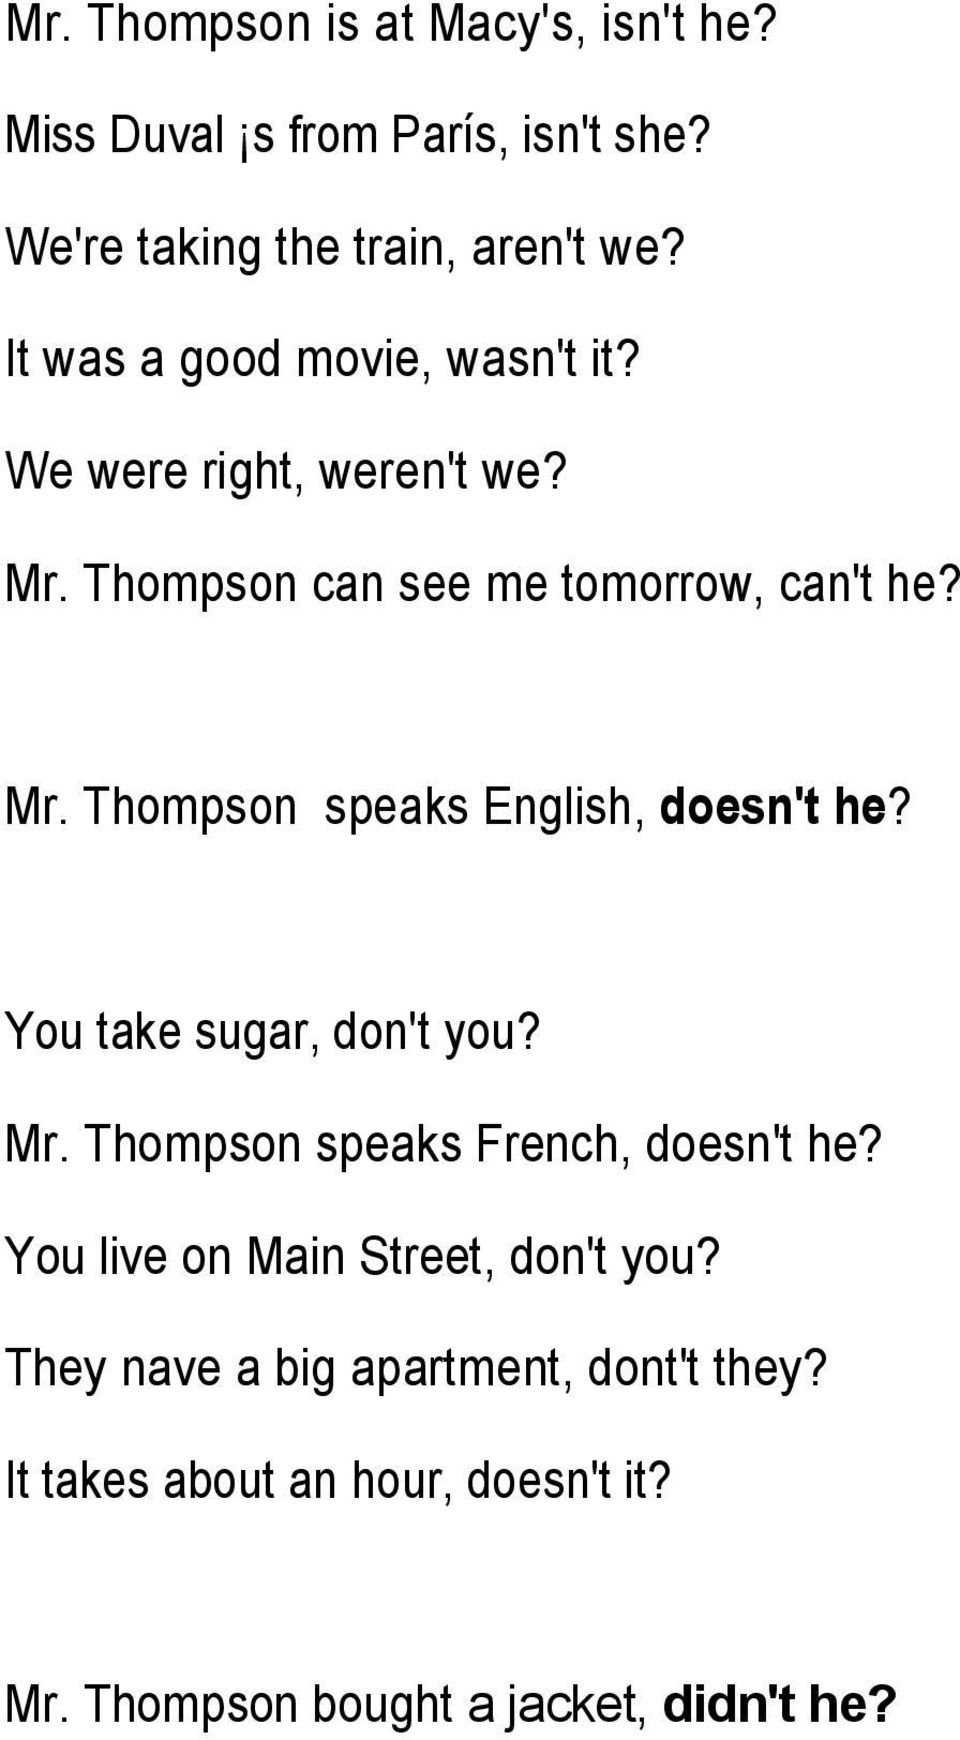 You take sugar, don't you? Mr. Thompson speaks French, doesn't he? You live on Main Street, don't you?